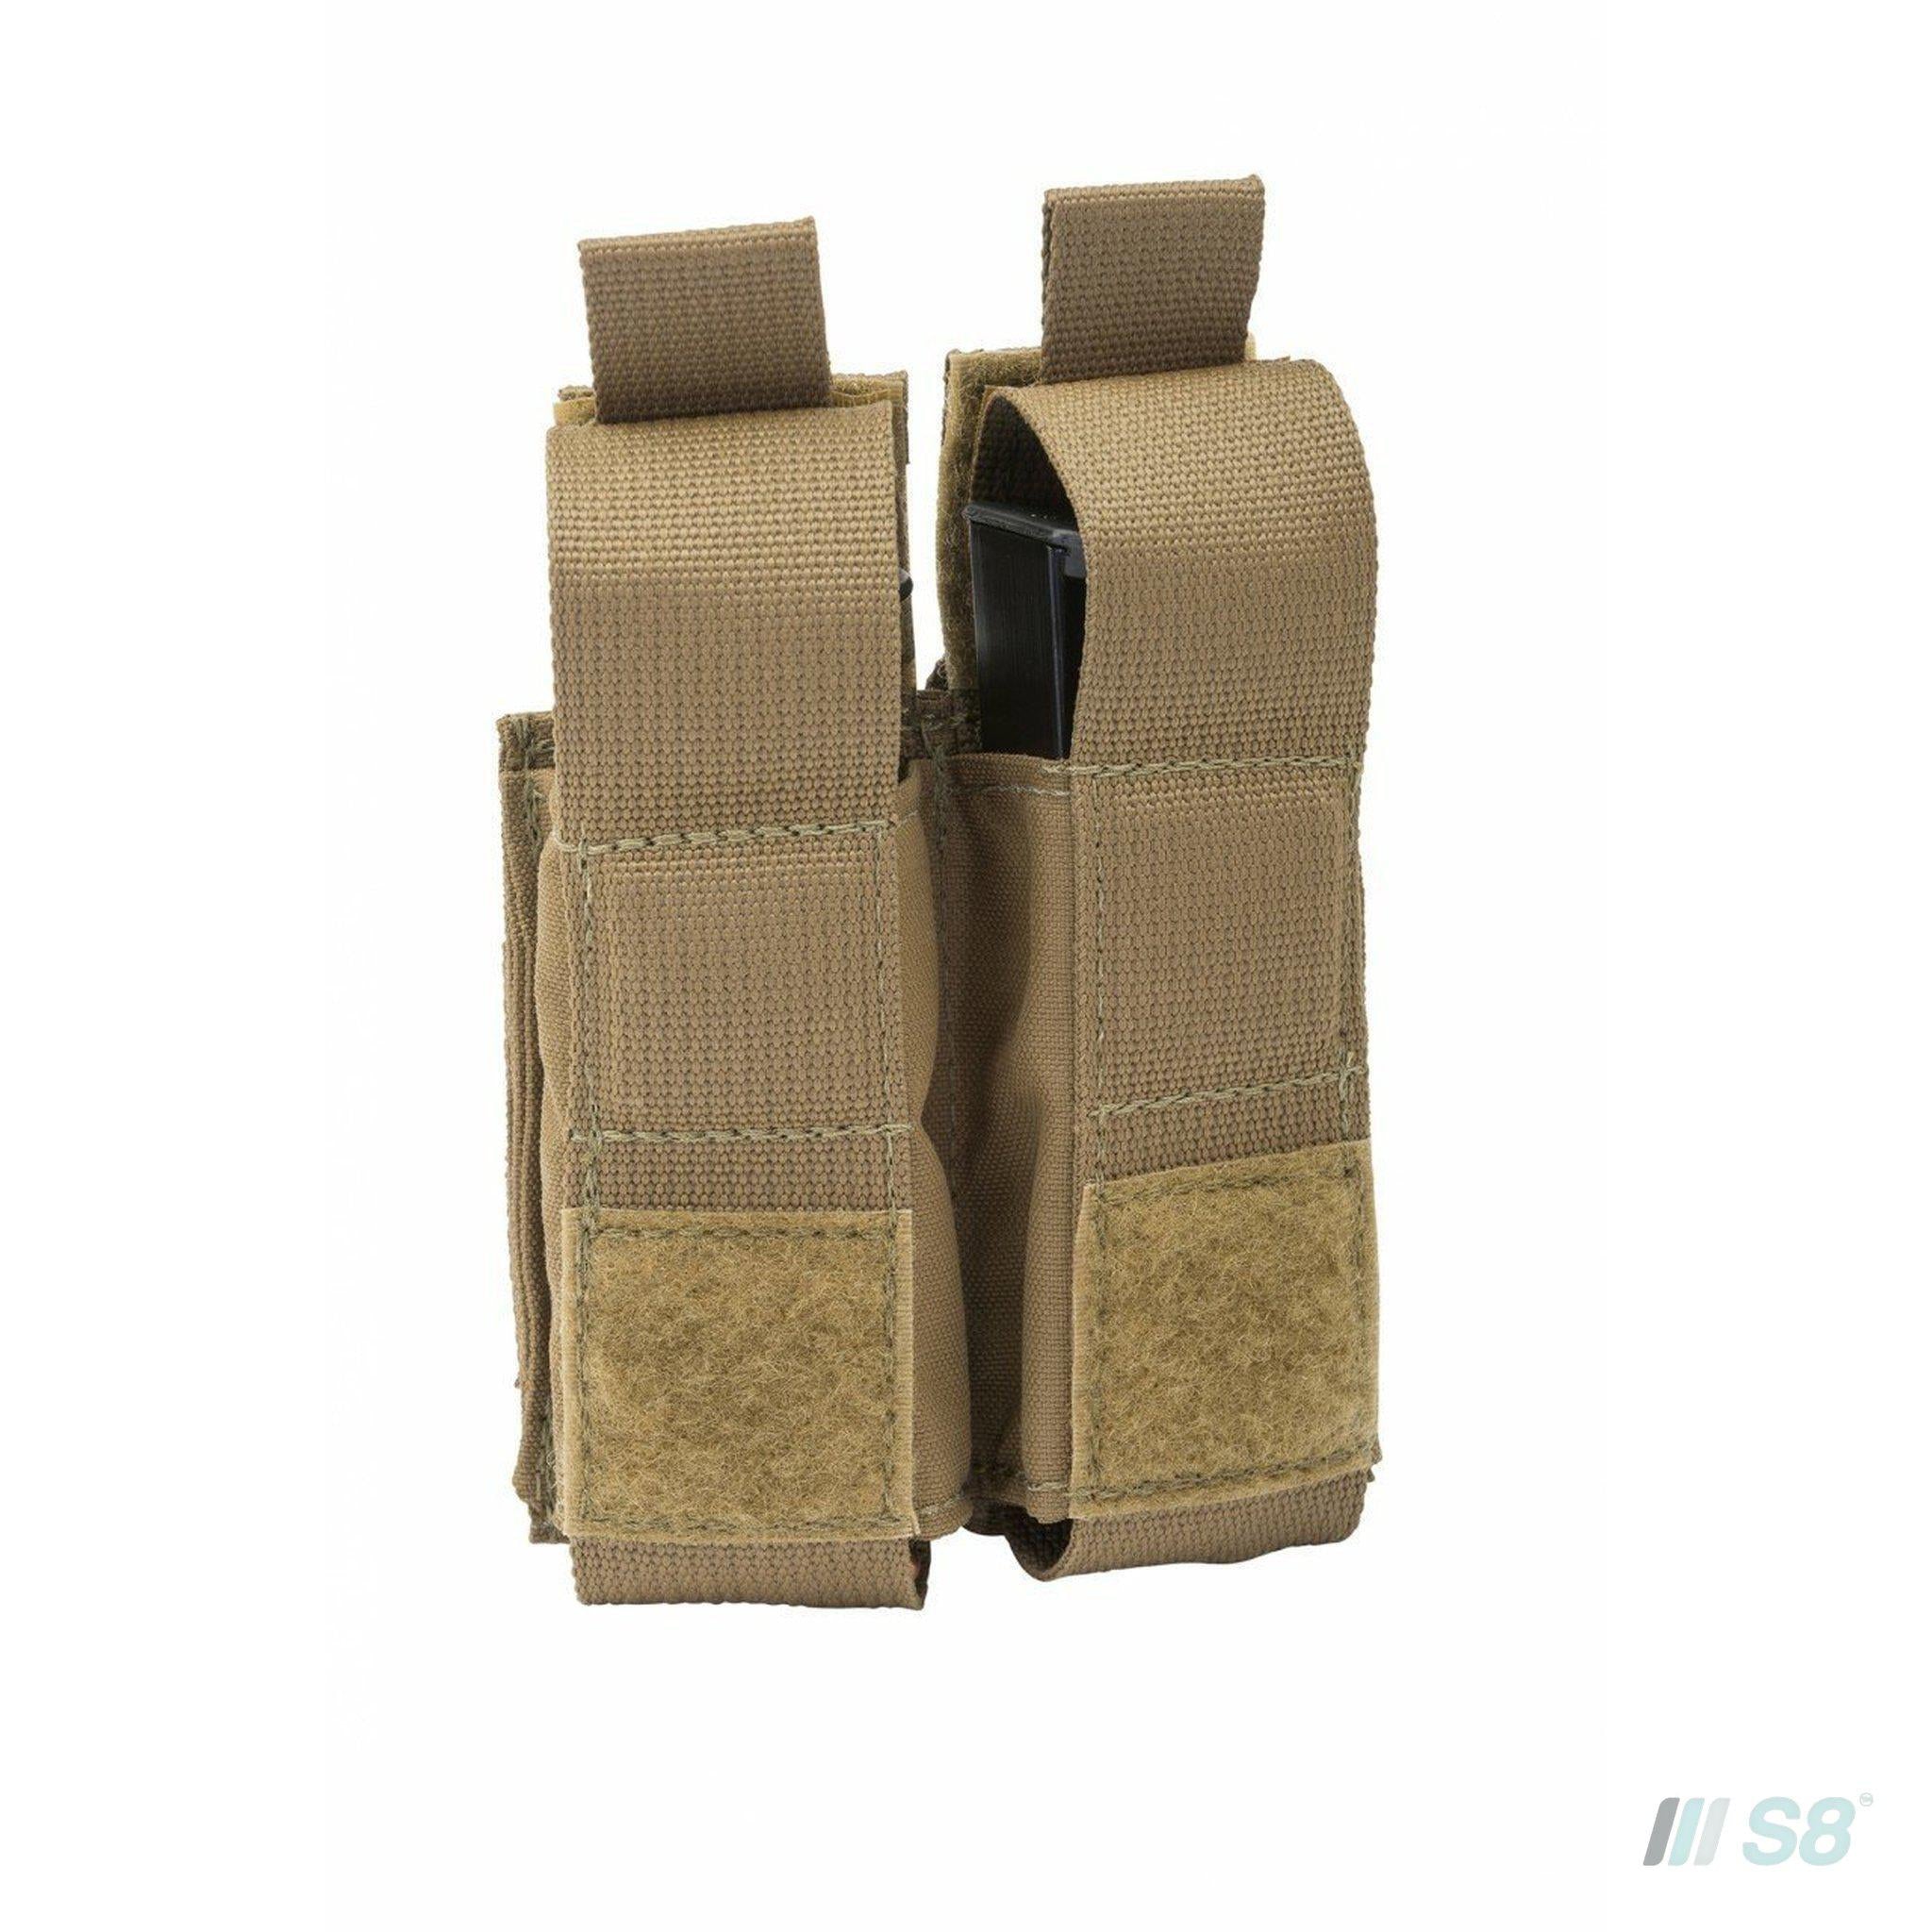 T3 Magnet Double Pistol Mag Pouch + Flap (2)-T3-S8 Products Group